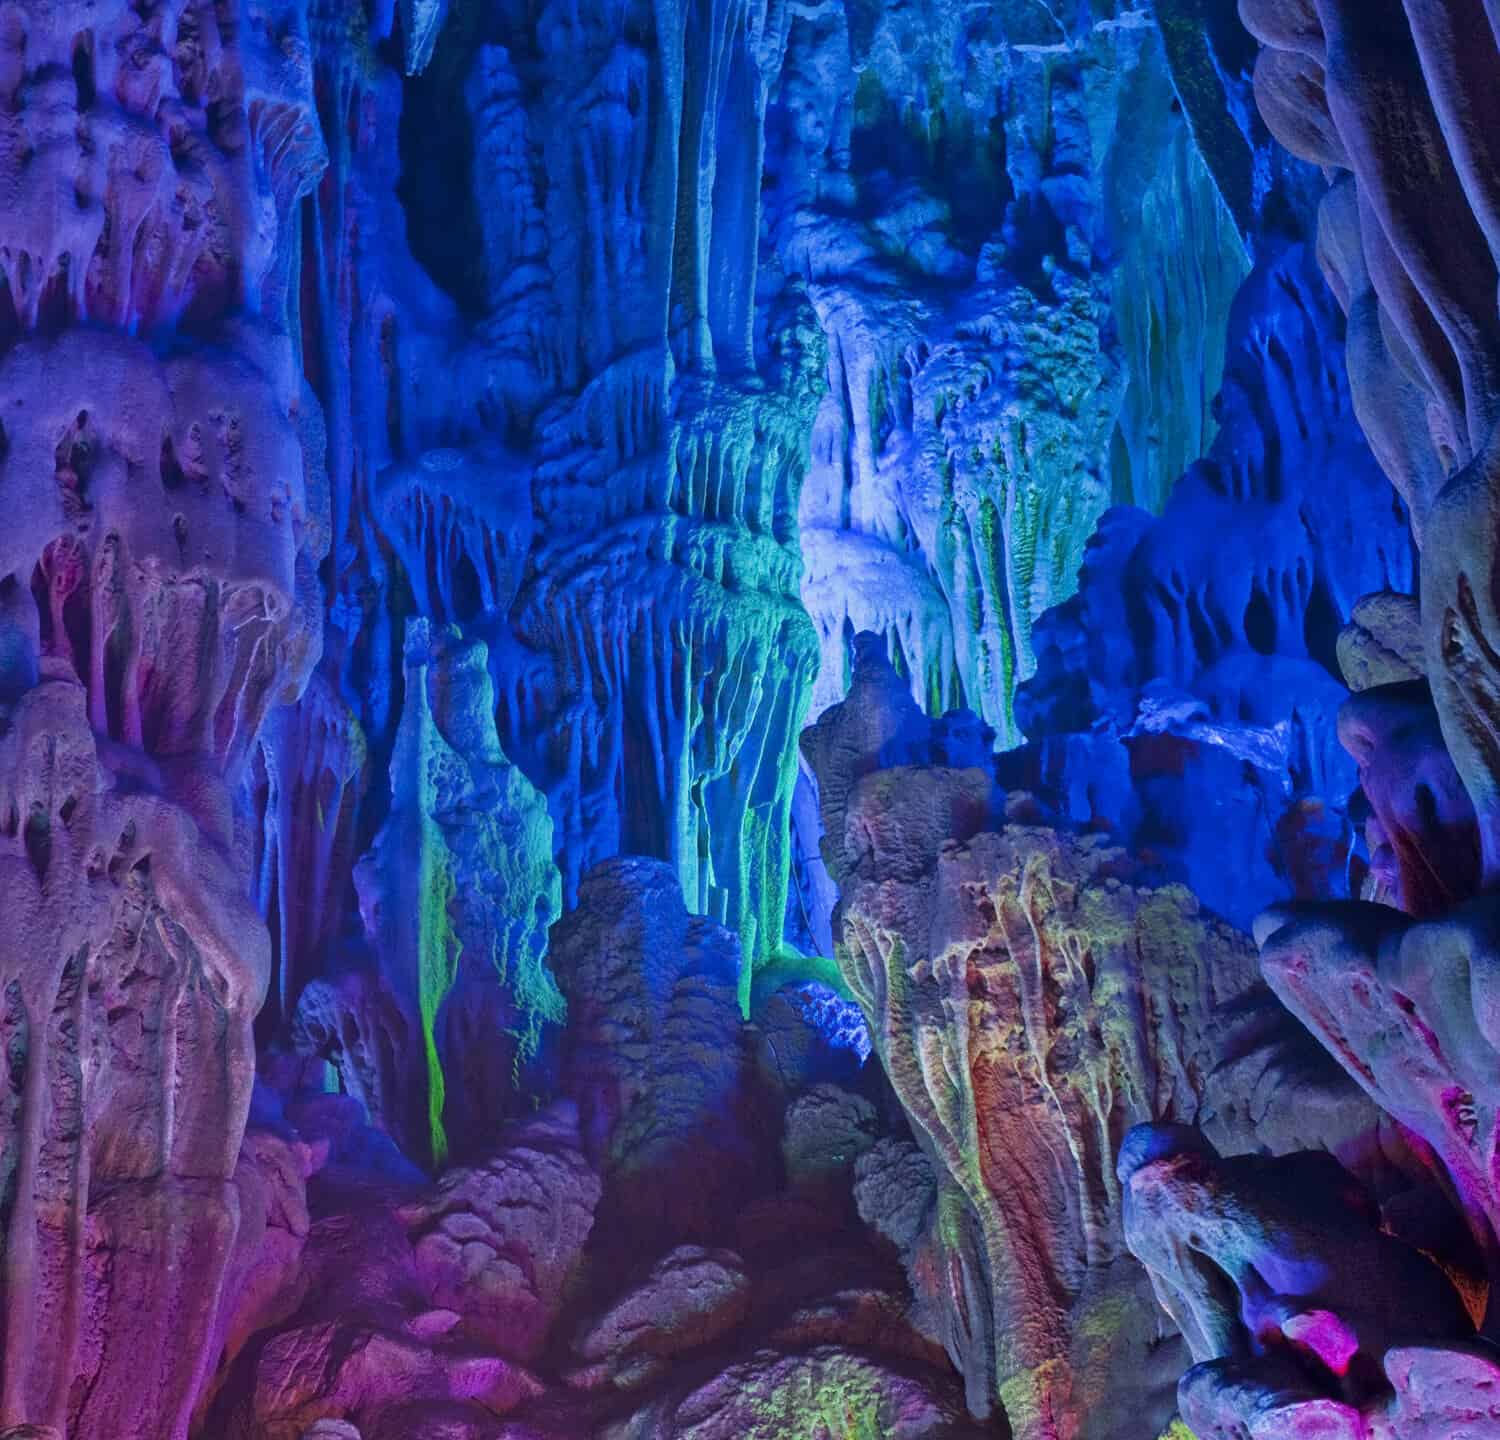 The beautifully illuminated Reed Flute Caves displaying the "Morning Sunrise over the Lion Jungle" formations. Located in Guilin, Guangxi Provine, China